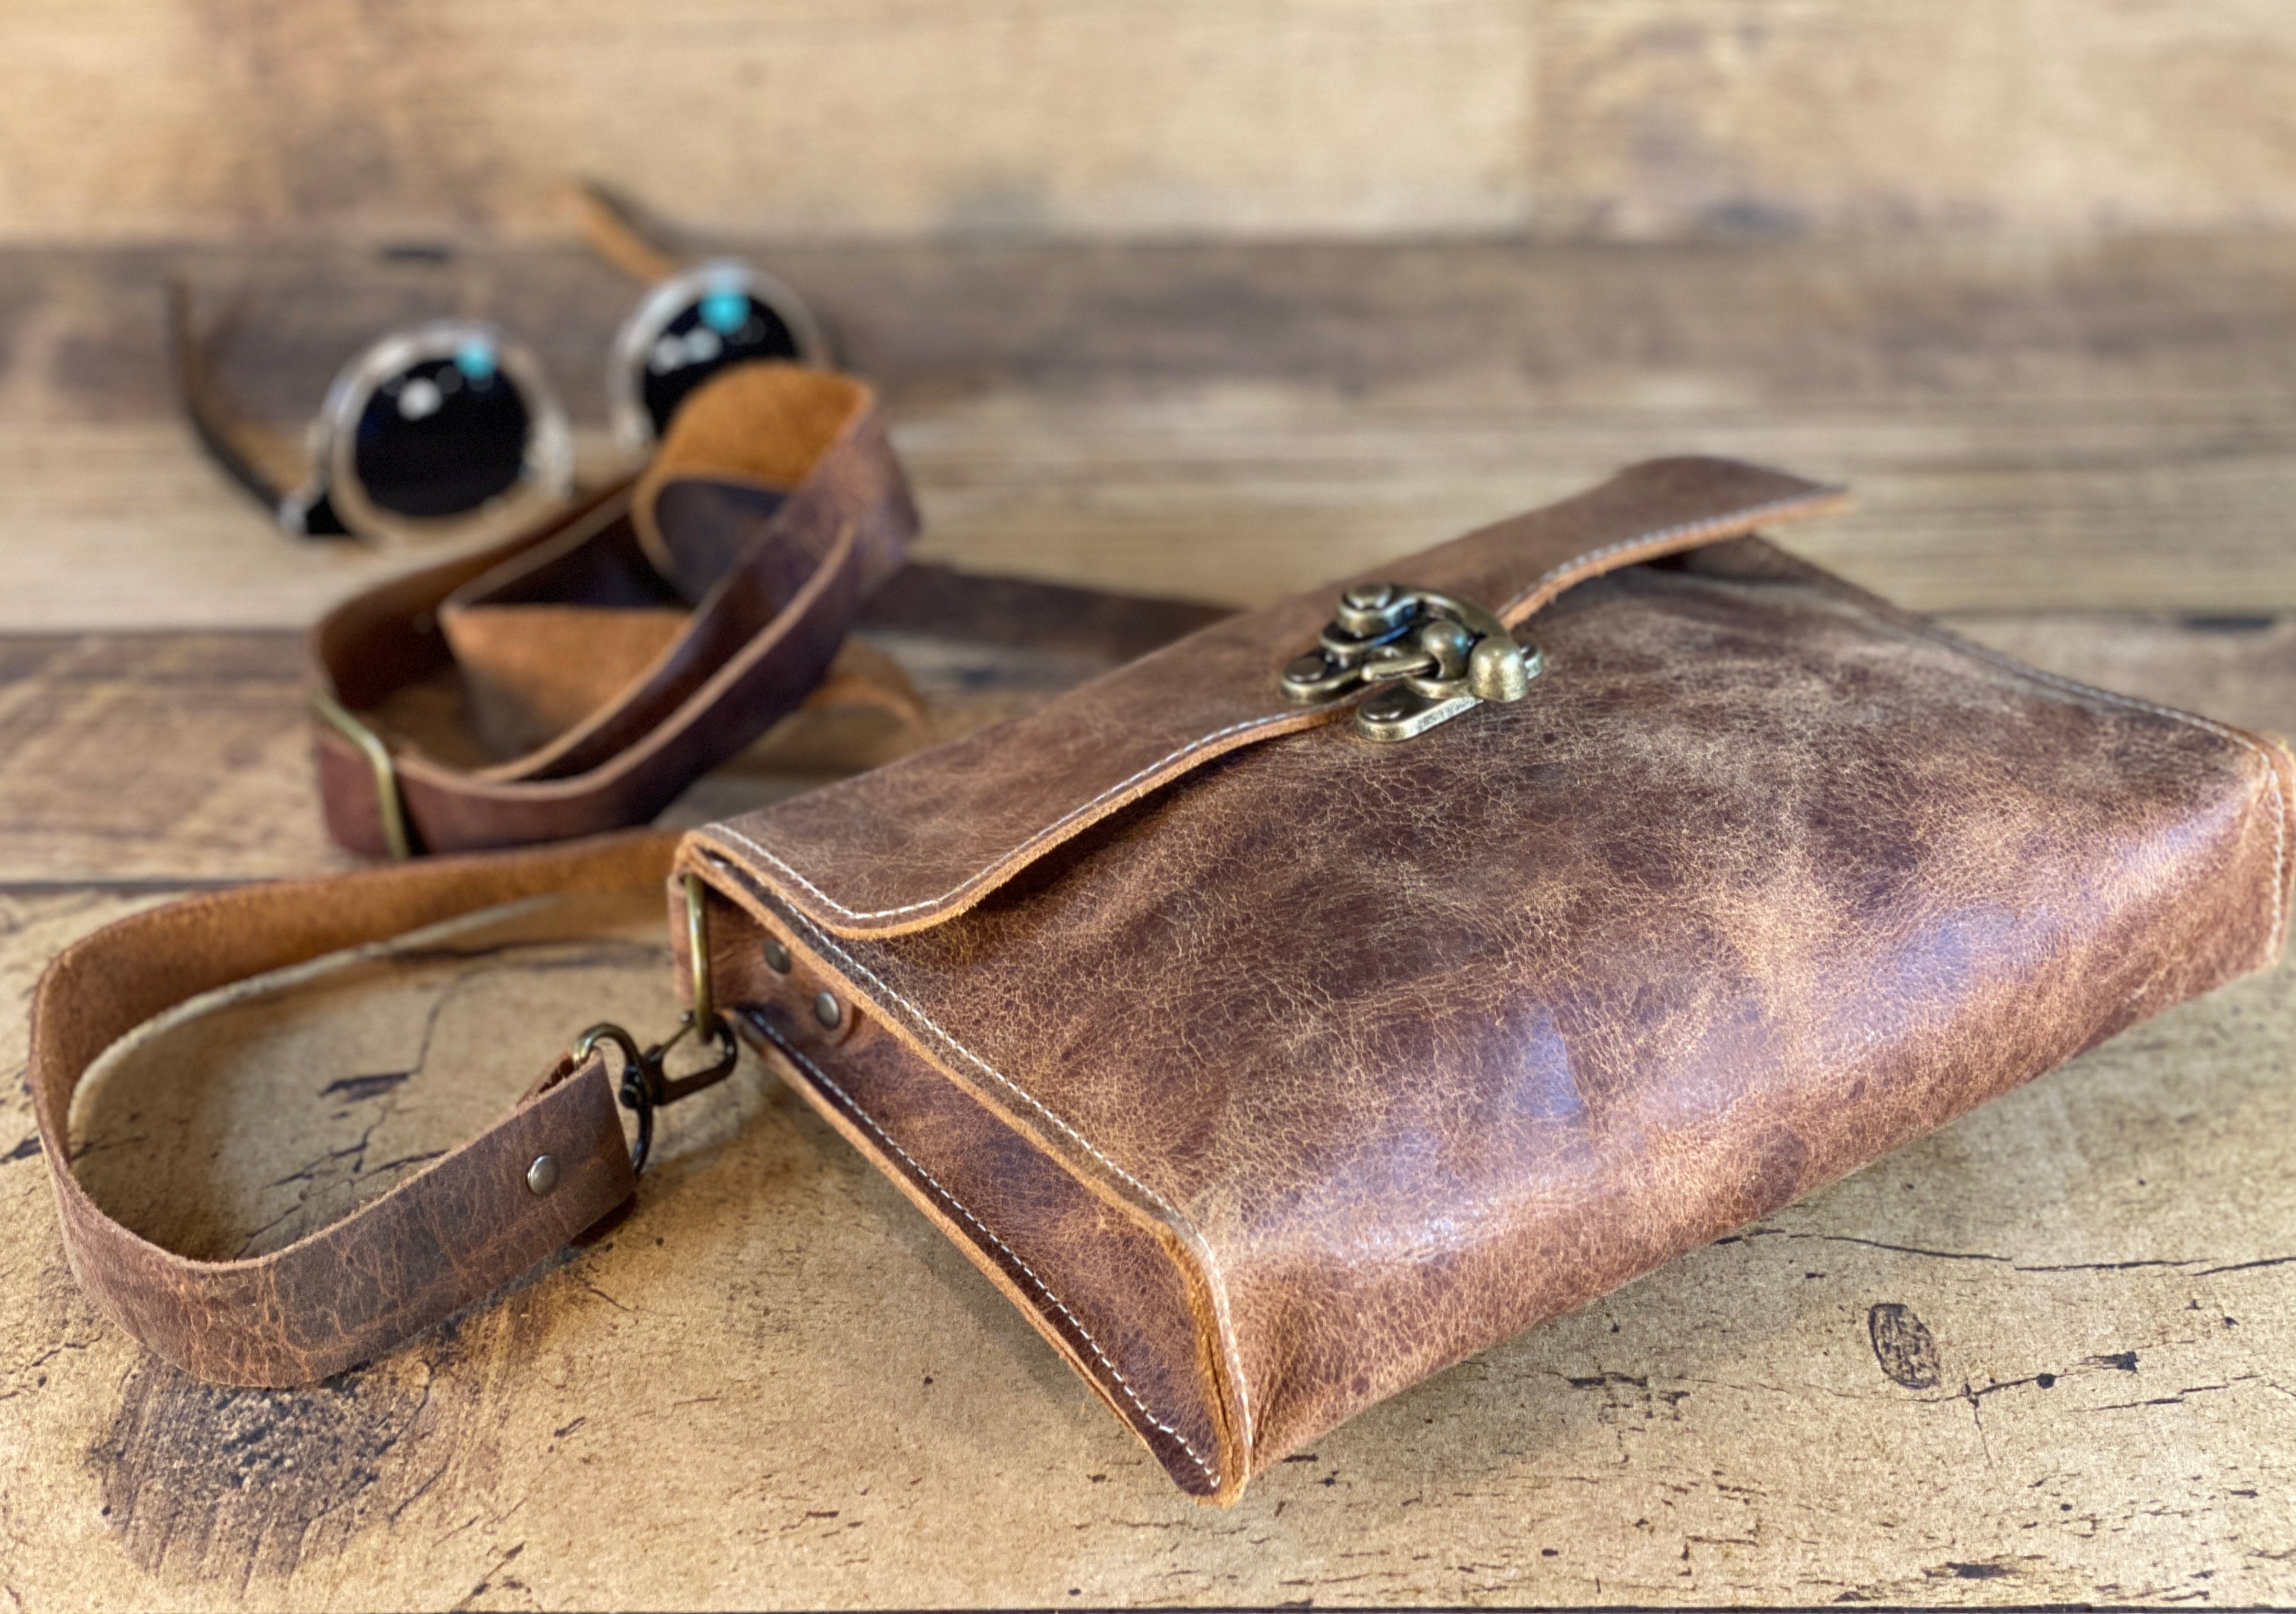 Distressed Buffalo Leather Shoulder Clutch